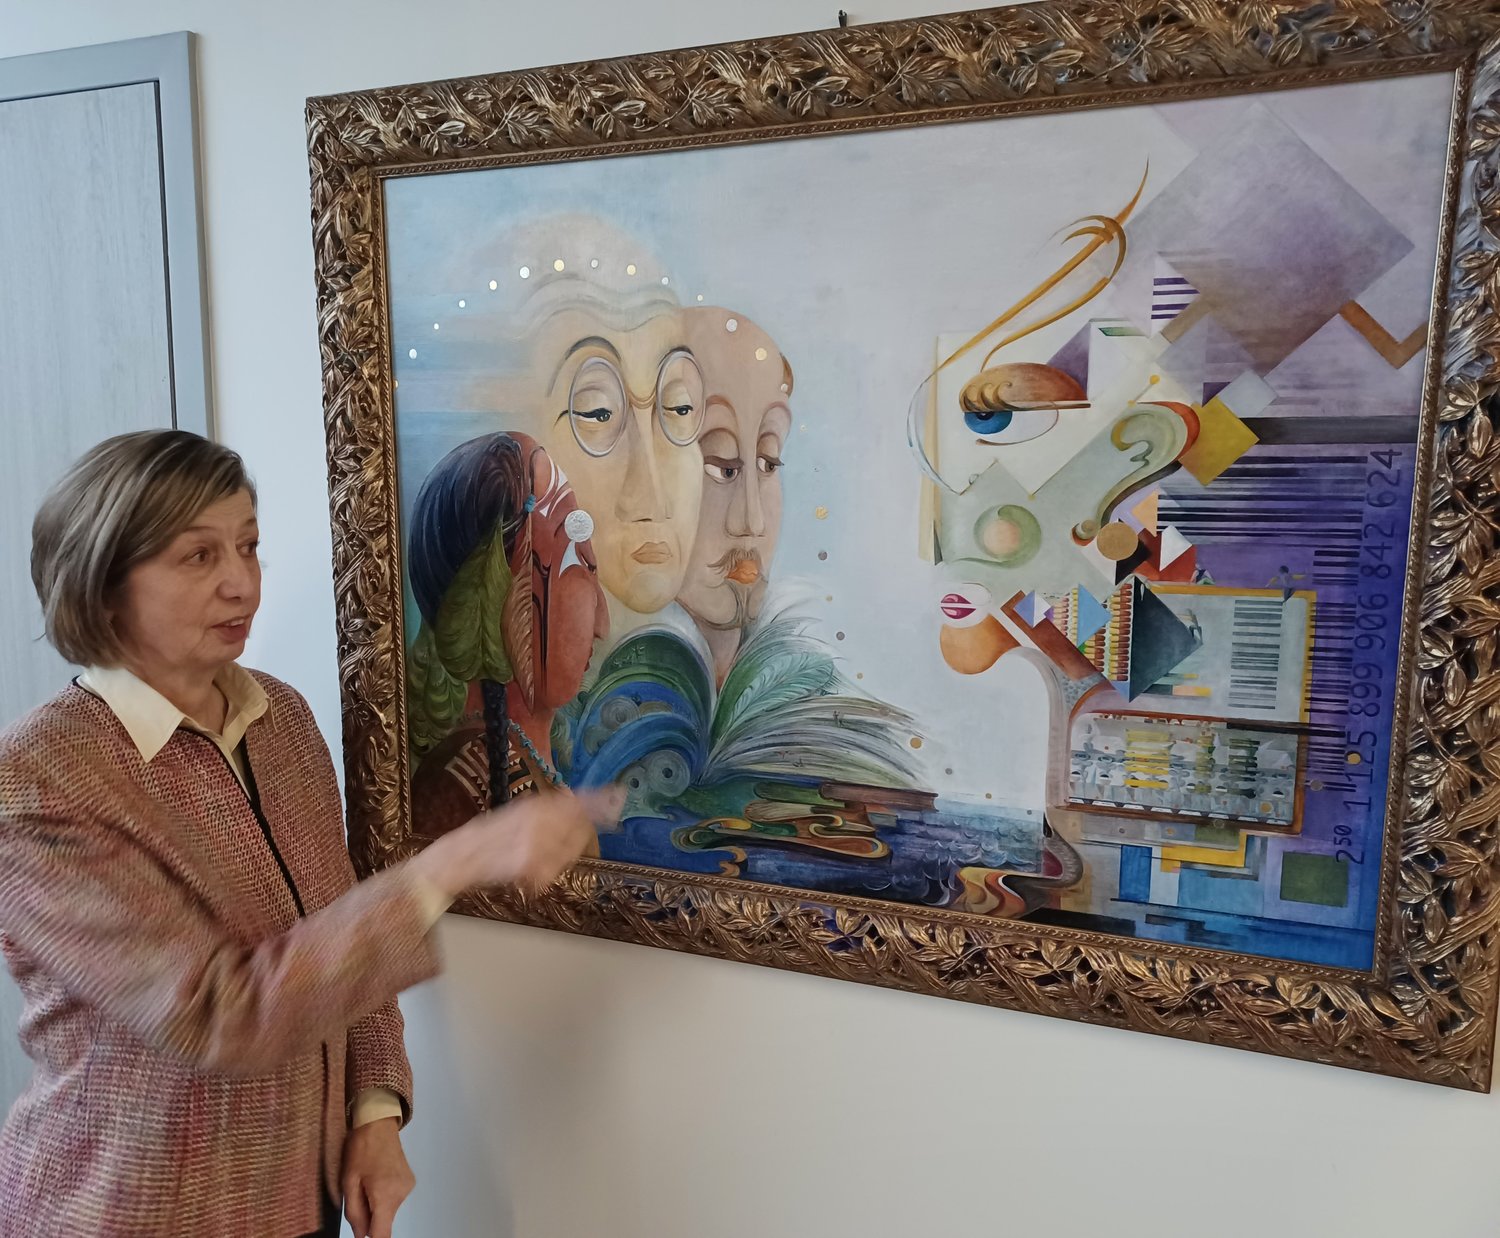 Susanne Schuenke points out some of the elements of her oil-and-gold-leaf painting, “Petabyte Abyss,” during a recent Artist Walk & Talk at the link.